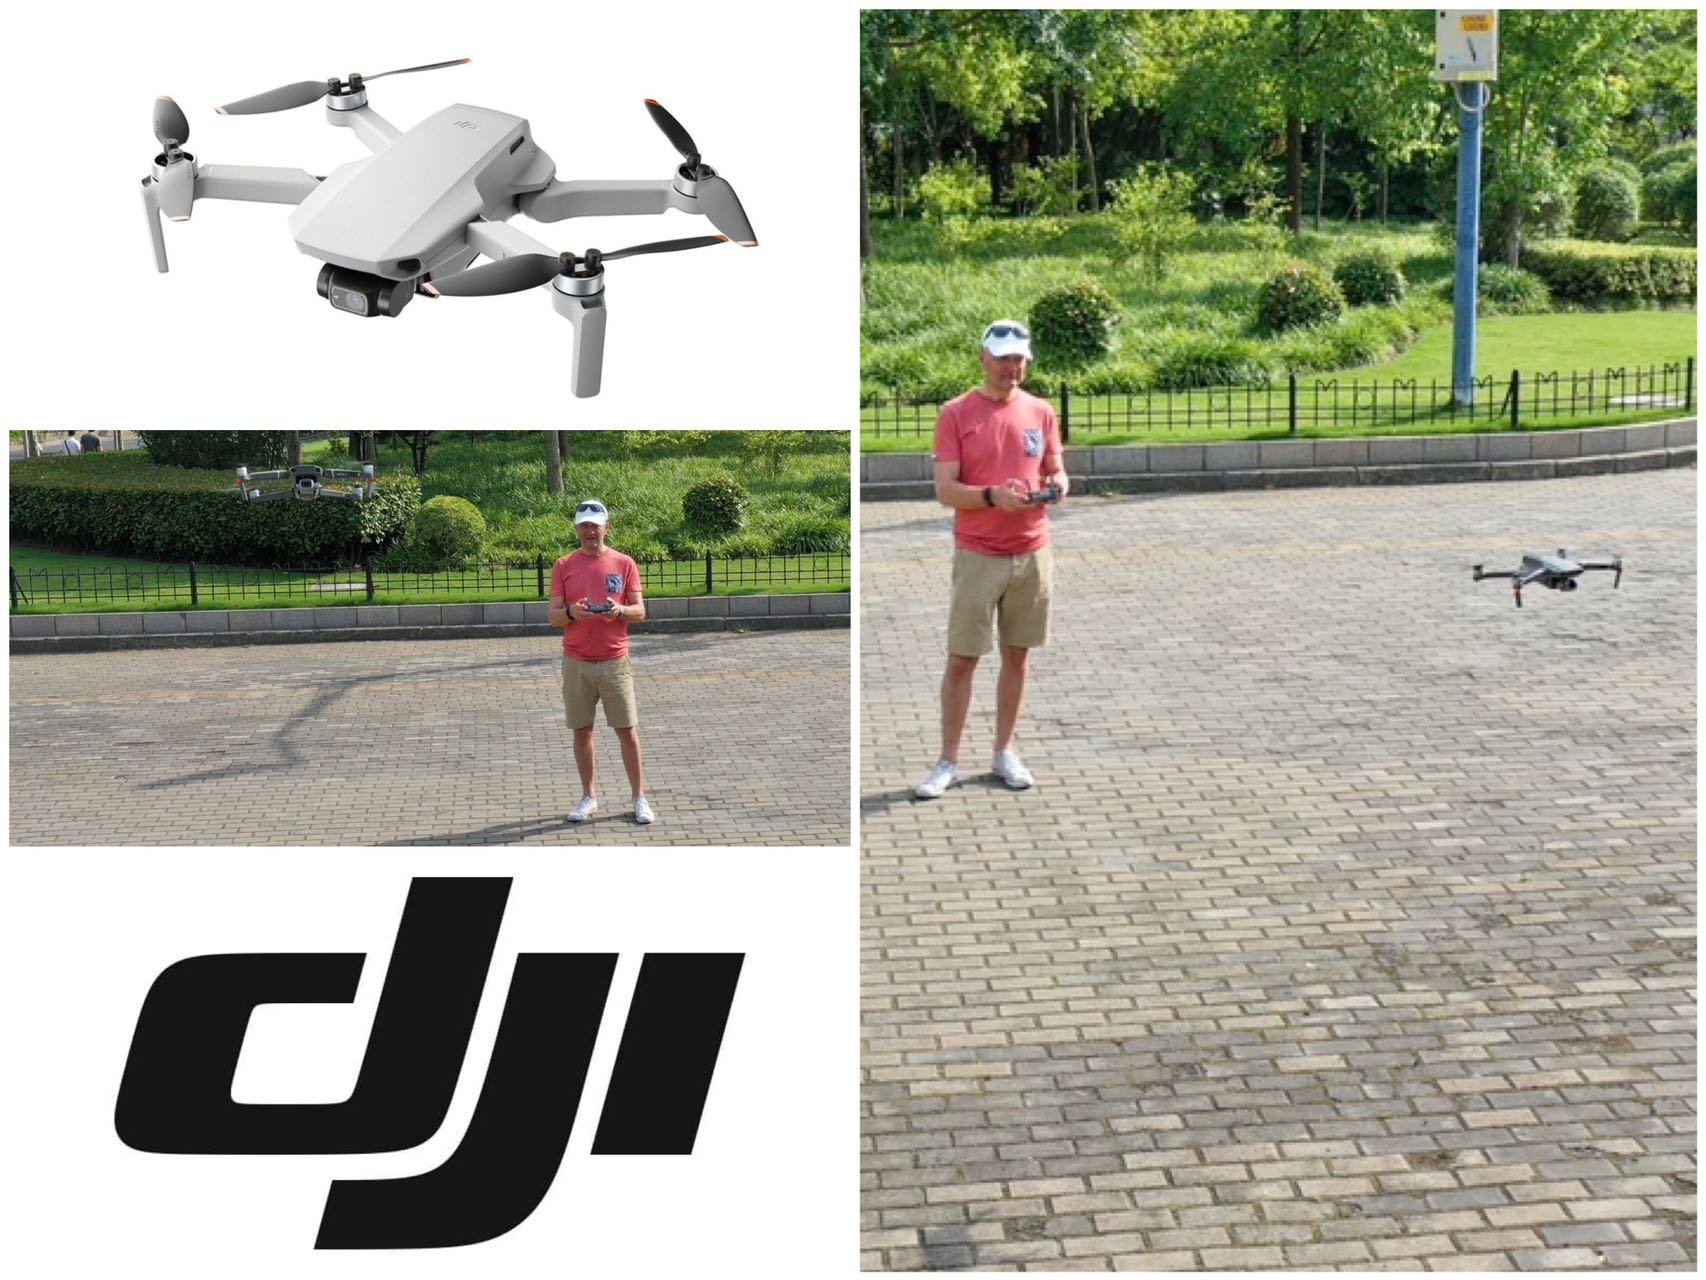 Michael Hundegger's best purchase in China: His DJI drone.